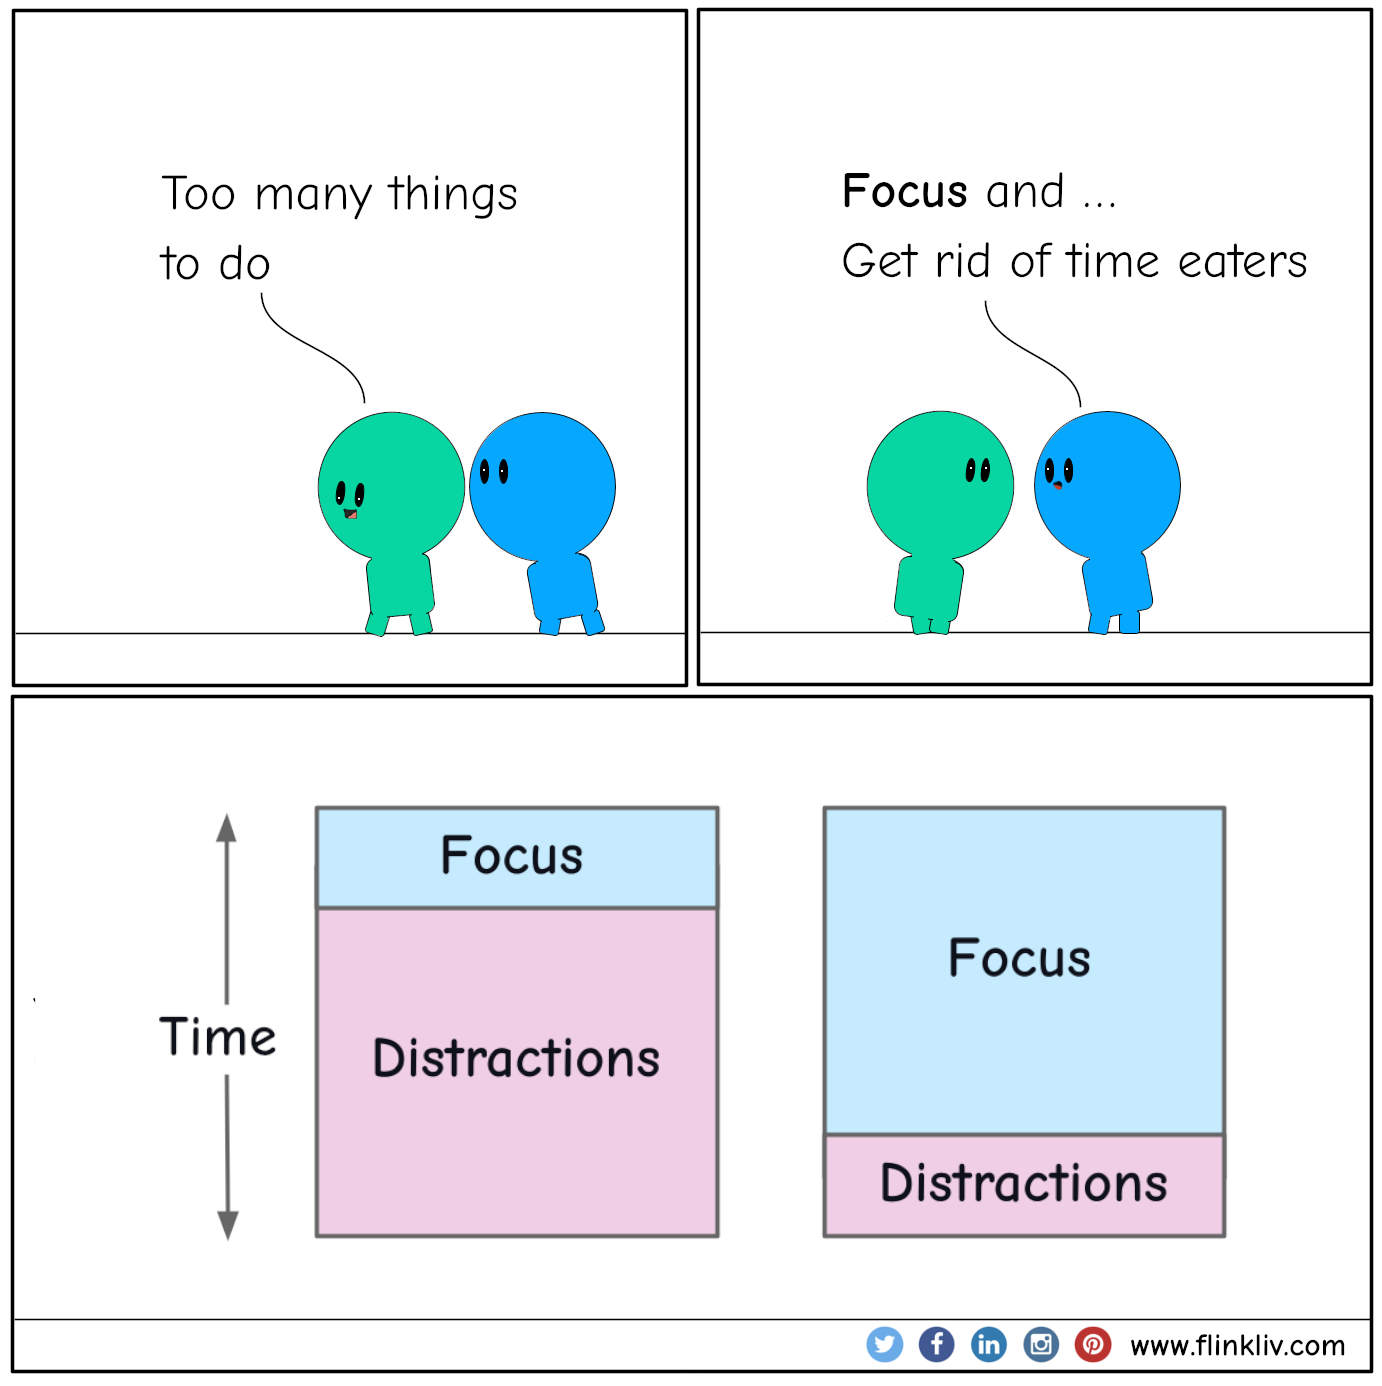 Conversation between A and B about the need to focus and get rid of time eaters. A: Too many things to do. B: Focus and get rid of time eaters. By Flinkliv.com